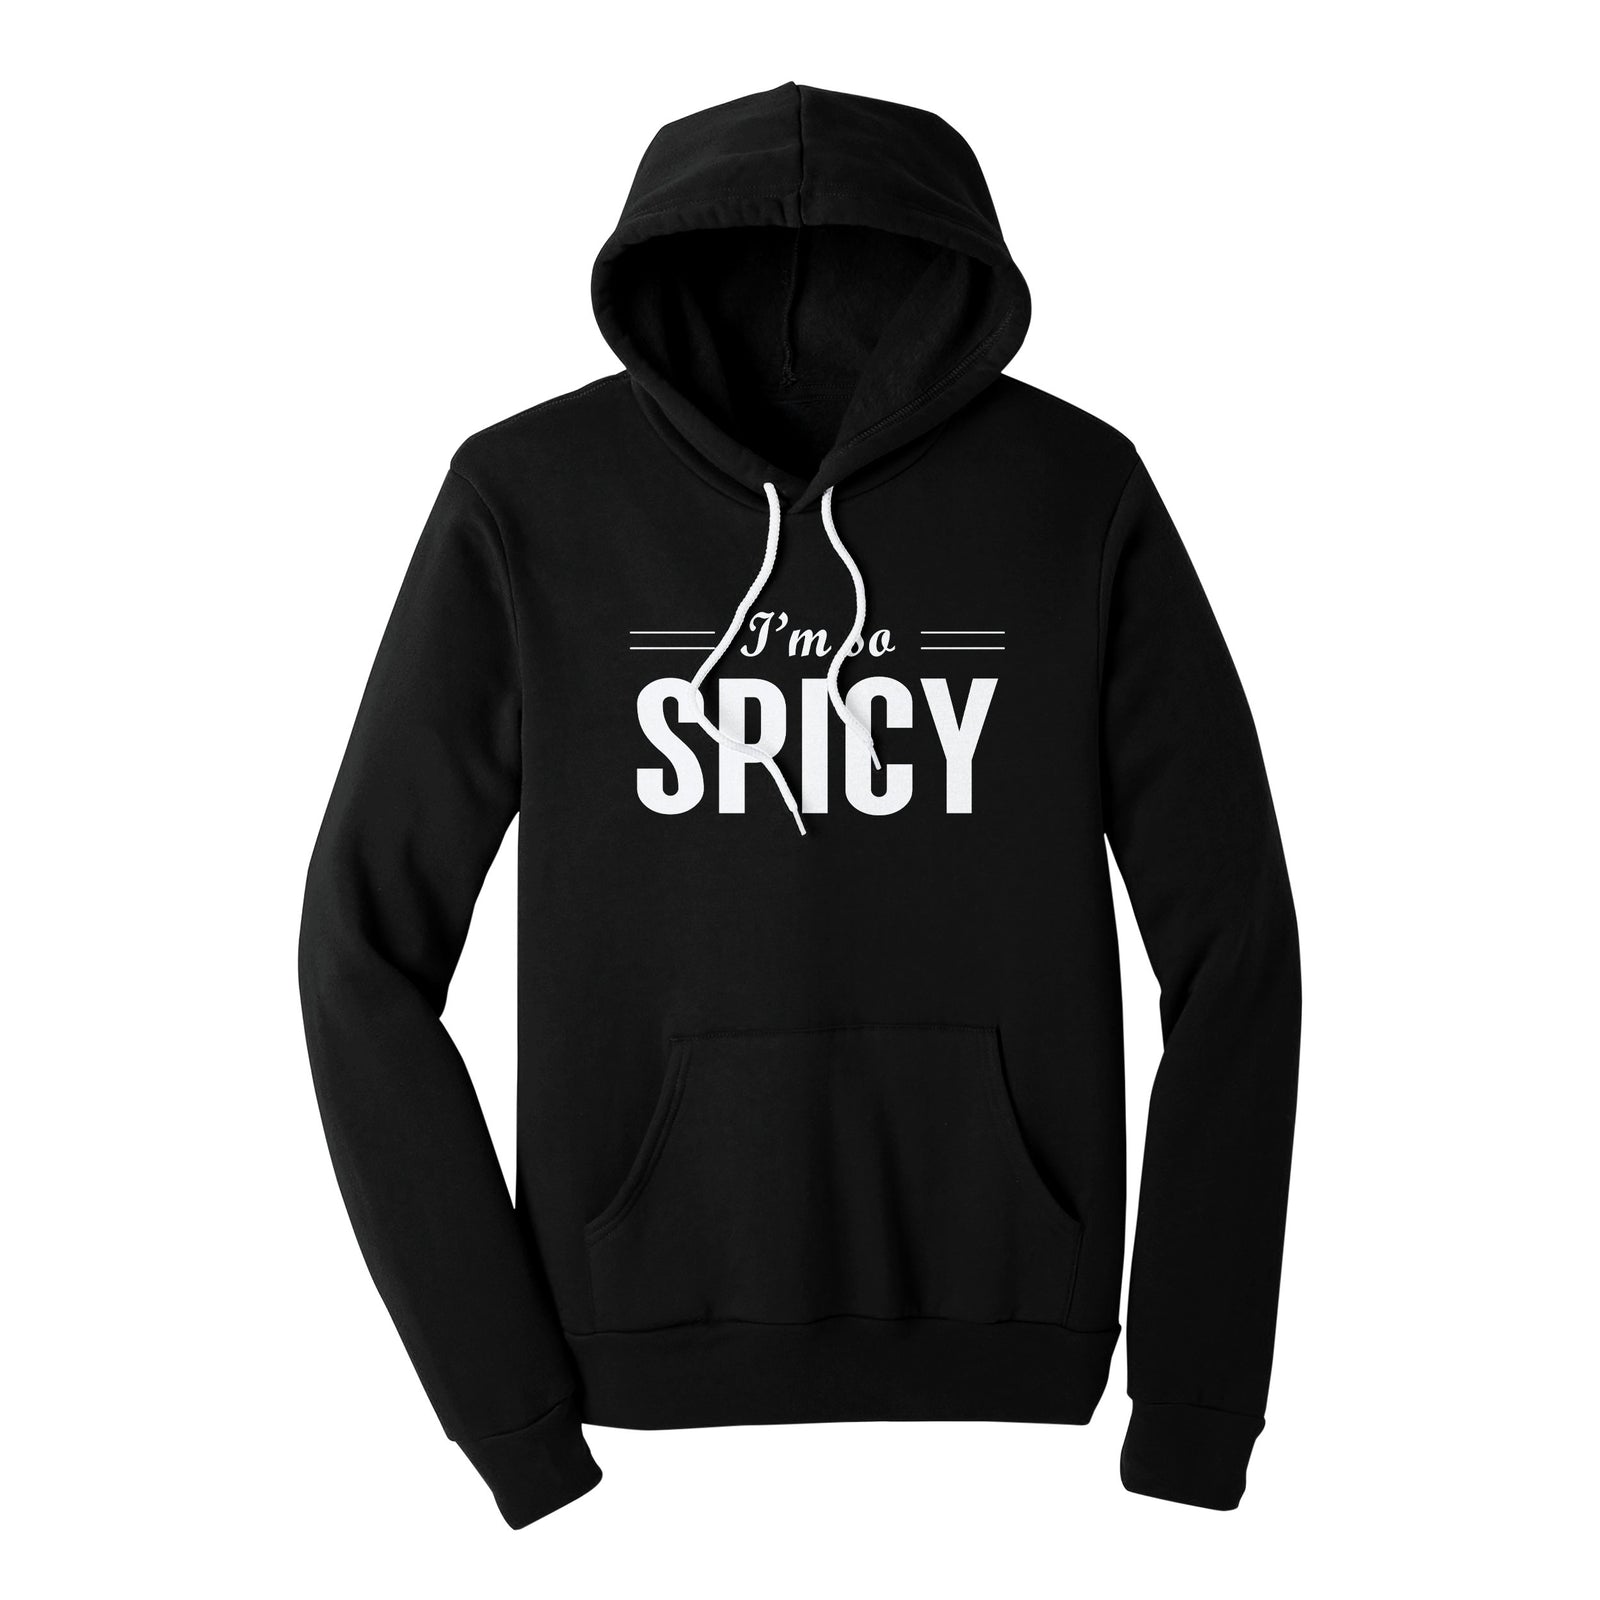 //cdn.shopify.com/s/files/1/0274/2488/2766/products/im-so-spicy-hoodie-624919_5000x.jpg?v=1675242712 5000w,
    //cdn.shopify.com/s/files/1/0274/2488/2766/products/im-so-spicy-hoodie-624919_4500x.jpg?v=1675242712 4500w,
    //cdn.shopify.com/s/files/1/0274/2488/2766/products/im-so-spicy-hoodie-624919_4000x.jpg?v=1675242712 4000w,
    //cdn.shopify.com/s/files/1/0274/2488/2766/products/im-so-spicy-hoodie-624919_3500x.jpg?v=1675242712 3500w,
    //cdn.shopify.com/s/files/1/0274/2488/2766/products/im-so-spicy-hoodie-624919_3000x.jpg?v=1675242712 3000w,
    //cdn.shopify.com/s/files/1/0274/2488/2766/products/im-so-spicy-hoodie-624919_2500x.jpg?v=1675242712 2500w,
    //cdn.shopify.com/s/files/1/0274/2488/2766/products/im-so-spicy-hoodie-624919_2000x.jpg?v=1675242712 2000w,
    //cdn.shopify.com/s/files/1/0274/2488/2766/products/im-so-spicy-hoodie-624919_1800x.jpg?v=1675242712 1800w,
    //cdn.shopify.com/s/files/1/0274/2488/2766/products/im-so-spicy-hoodie-624919_1600x.jpg?v=1675242712 1600w,
    //cdn.shopify.com/s/files/1/0274/2488/2766/products/im-so-spicy-hoodie-624919_1400x.jpg?v=1675242712 1400w,
    //cdn.shopify.com/s/files/1/0274/2488/2766/products/im-so-spicy-hoodie-624919_1200x.jpg?v=1675242712 1200w,
    //cdn.shopify.com/s/files/1/0274/2488/2766/products/im-so-spicy-hoodie-624919_1000x.jpg?v=1675242712 1000w,
    //cdn.shopify.com/s/files/1/0274/2488/2766/products/im-so-spicy-hoodie-624919_800x.jpg?v=1675242712 800w,
    //cdn.shopify.com/s/files/1/0274/2488/2766/products/im-so-spicy-hoodie-624919_600x.jpg?v=1675242712 600w,
    //cdn.shopify.com/s/files/1/0274/2488/2766/products/im-so-spicy-hoodie-624919_400x.jpg?v=1675242712 400w,
    //cdn.shopify.com/s/files/1/0274/2488/2766/products/im-so-spicy-hoodie-624919_200x.jpg?v=1675242712 200w